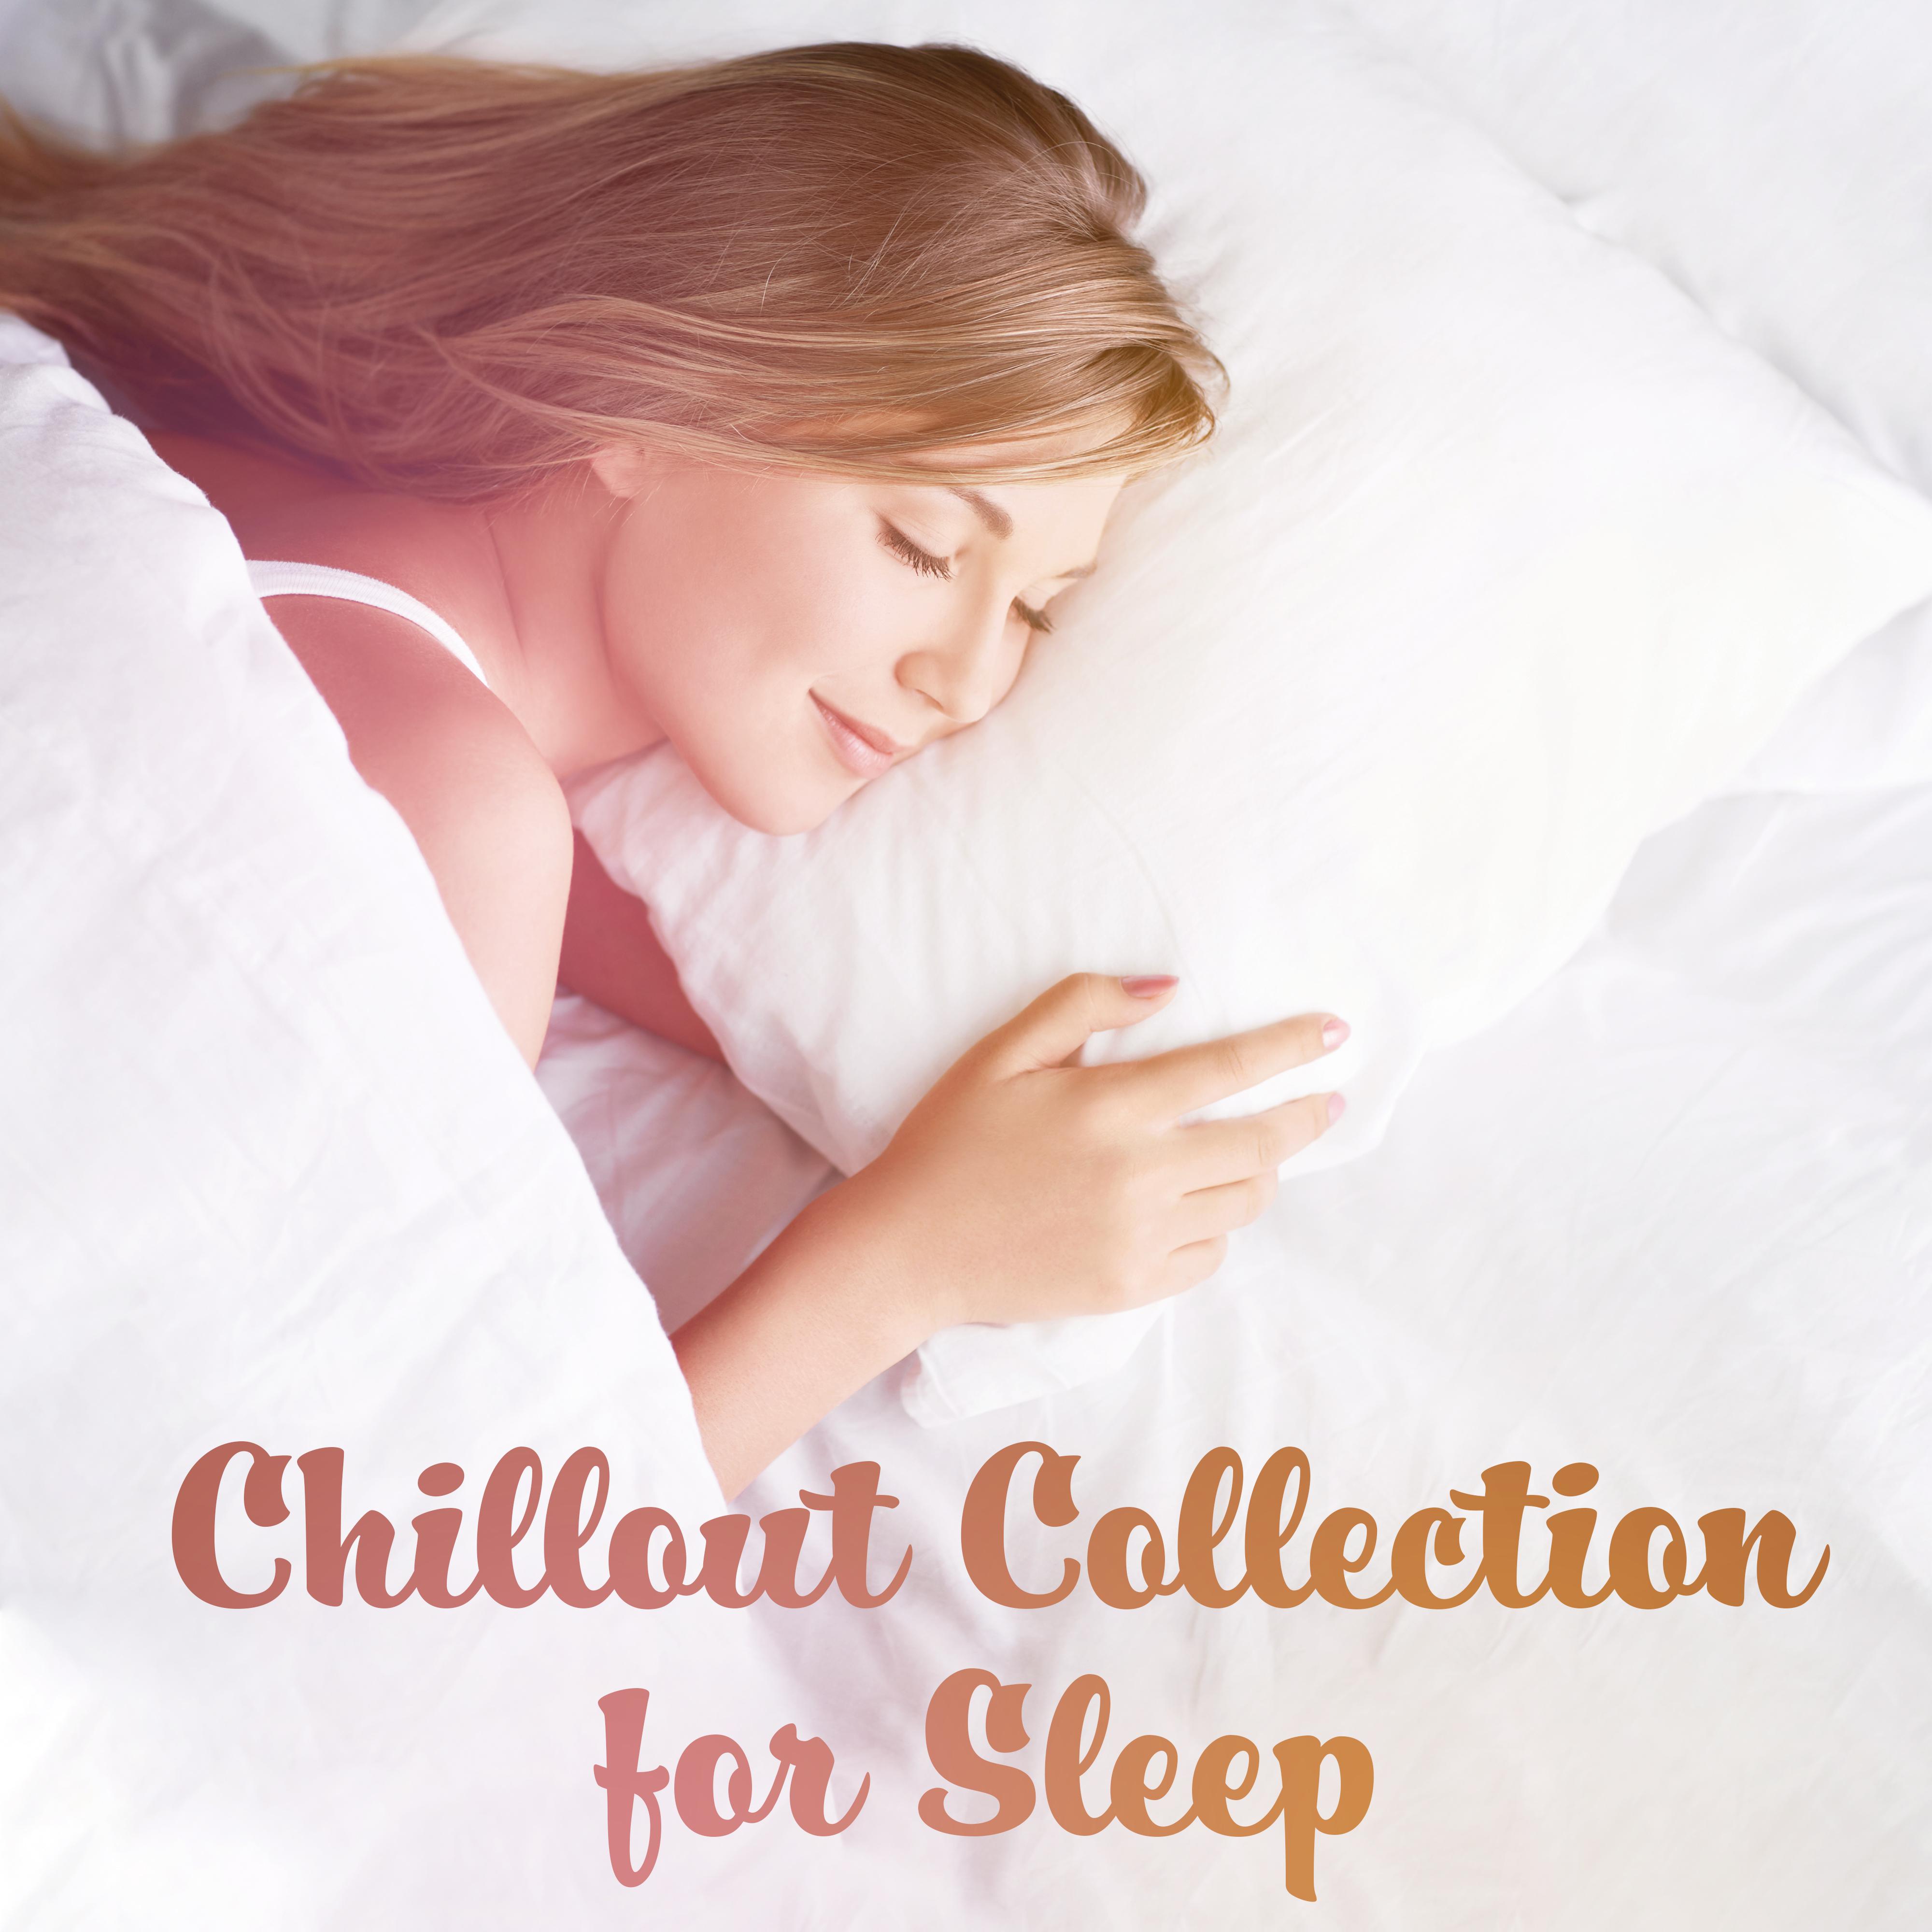 Chillout Collection for Sleep  Soothing Sounds for Deeper Sleep, Meditation, Relaxation, Inner Harmony, Nature Sounds at Night, Music for Reduce Stress, Sleep Songs 2019